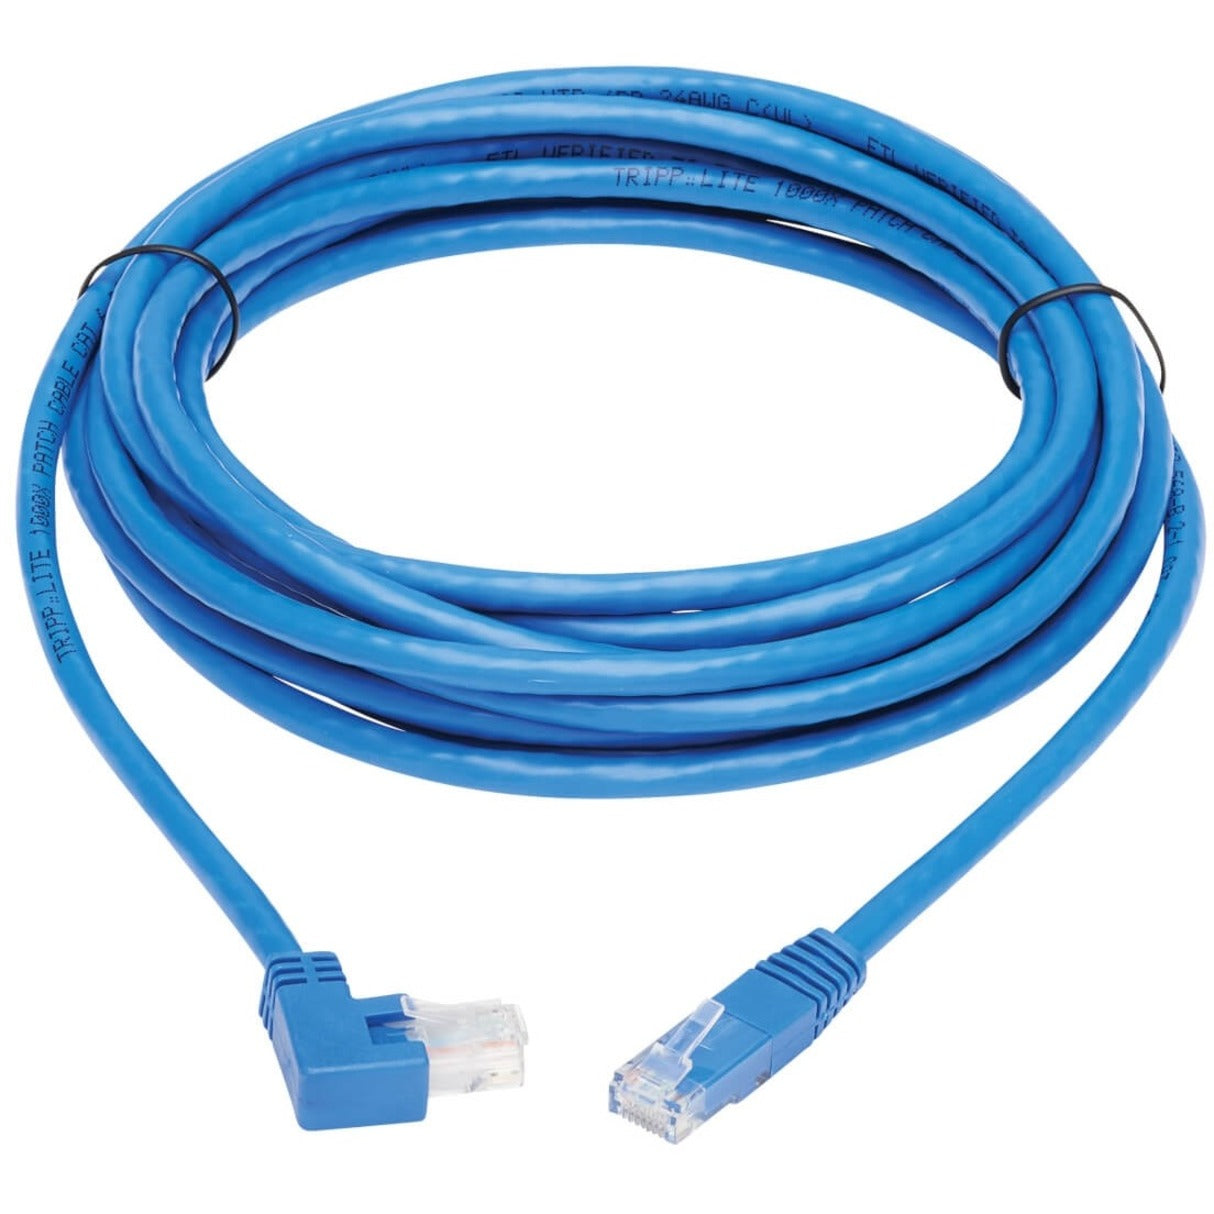 Tripp Lite N204-015-BL-RA Right-Angle Cat6 Ethernet Cable - 15 ft., M/M, Blue, Stranded, Molded, 90° Angled Connector, Gold Plated